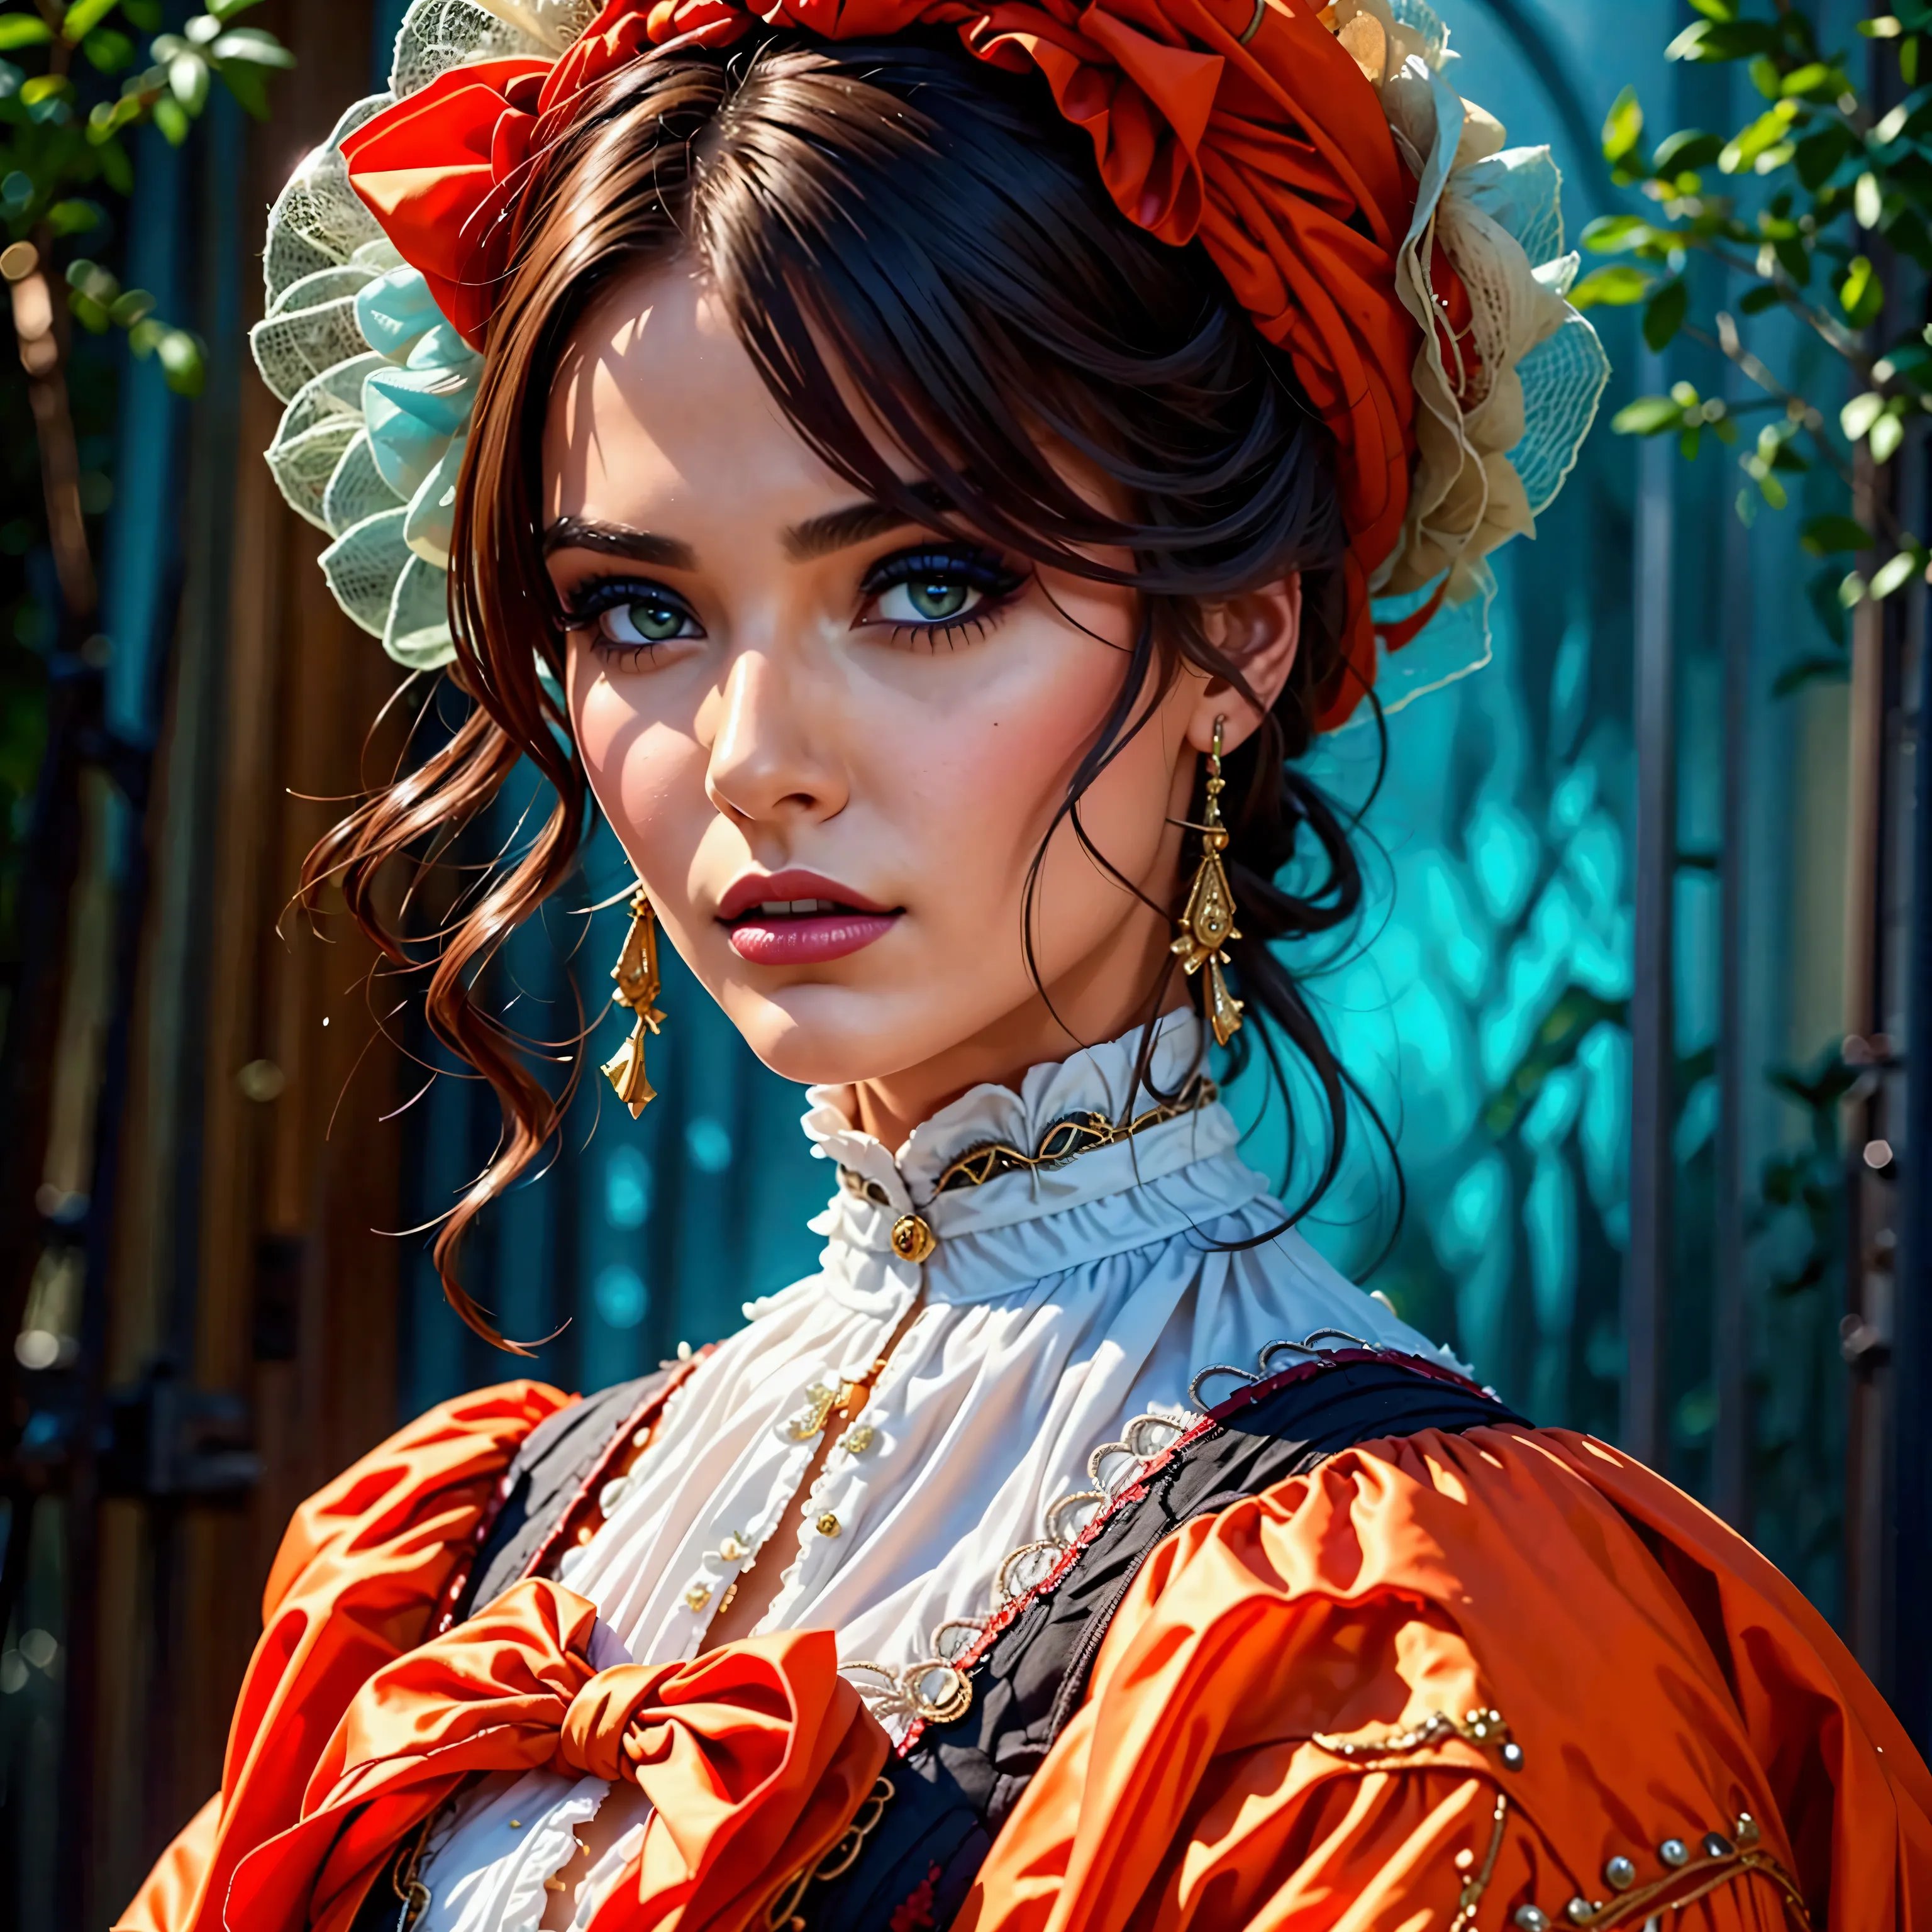 a woman in 1880s dress, a woman in 1980s outfit, a woman in 2180s futuristic outfit, masterpiece, highly detailed, photorealisti...